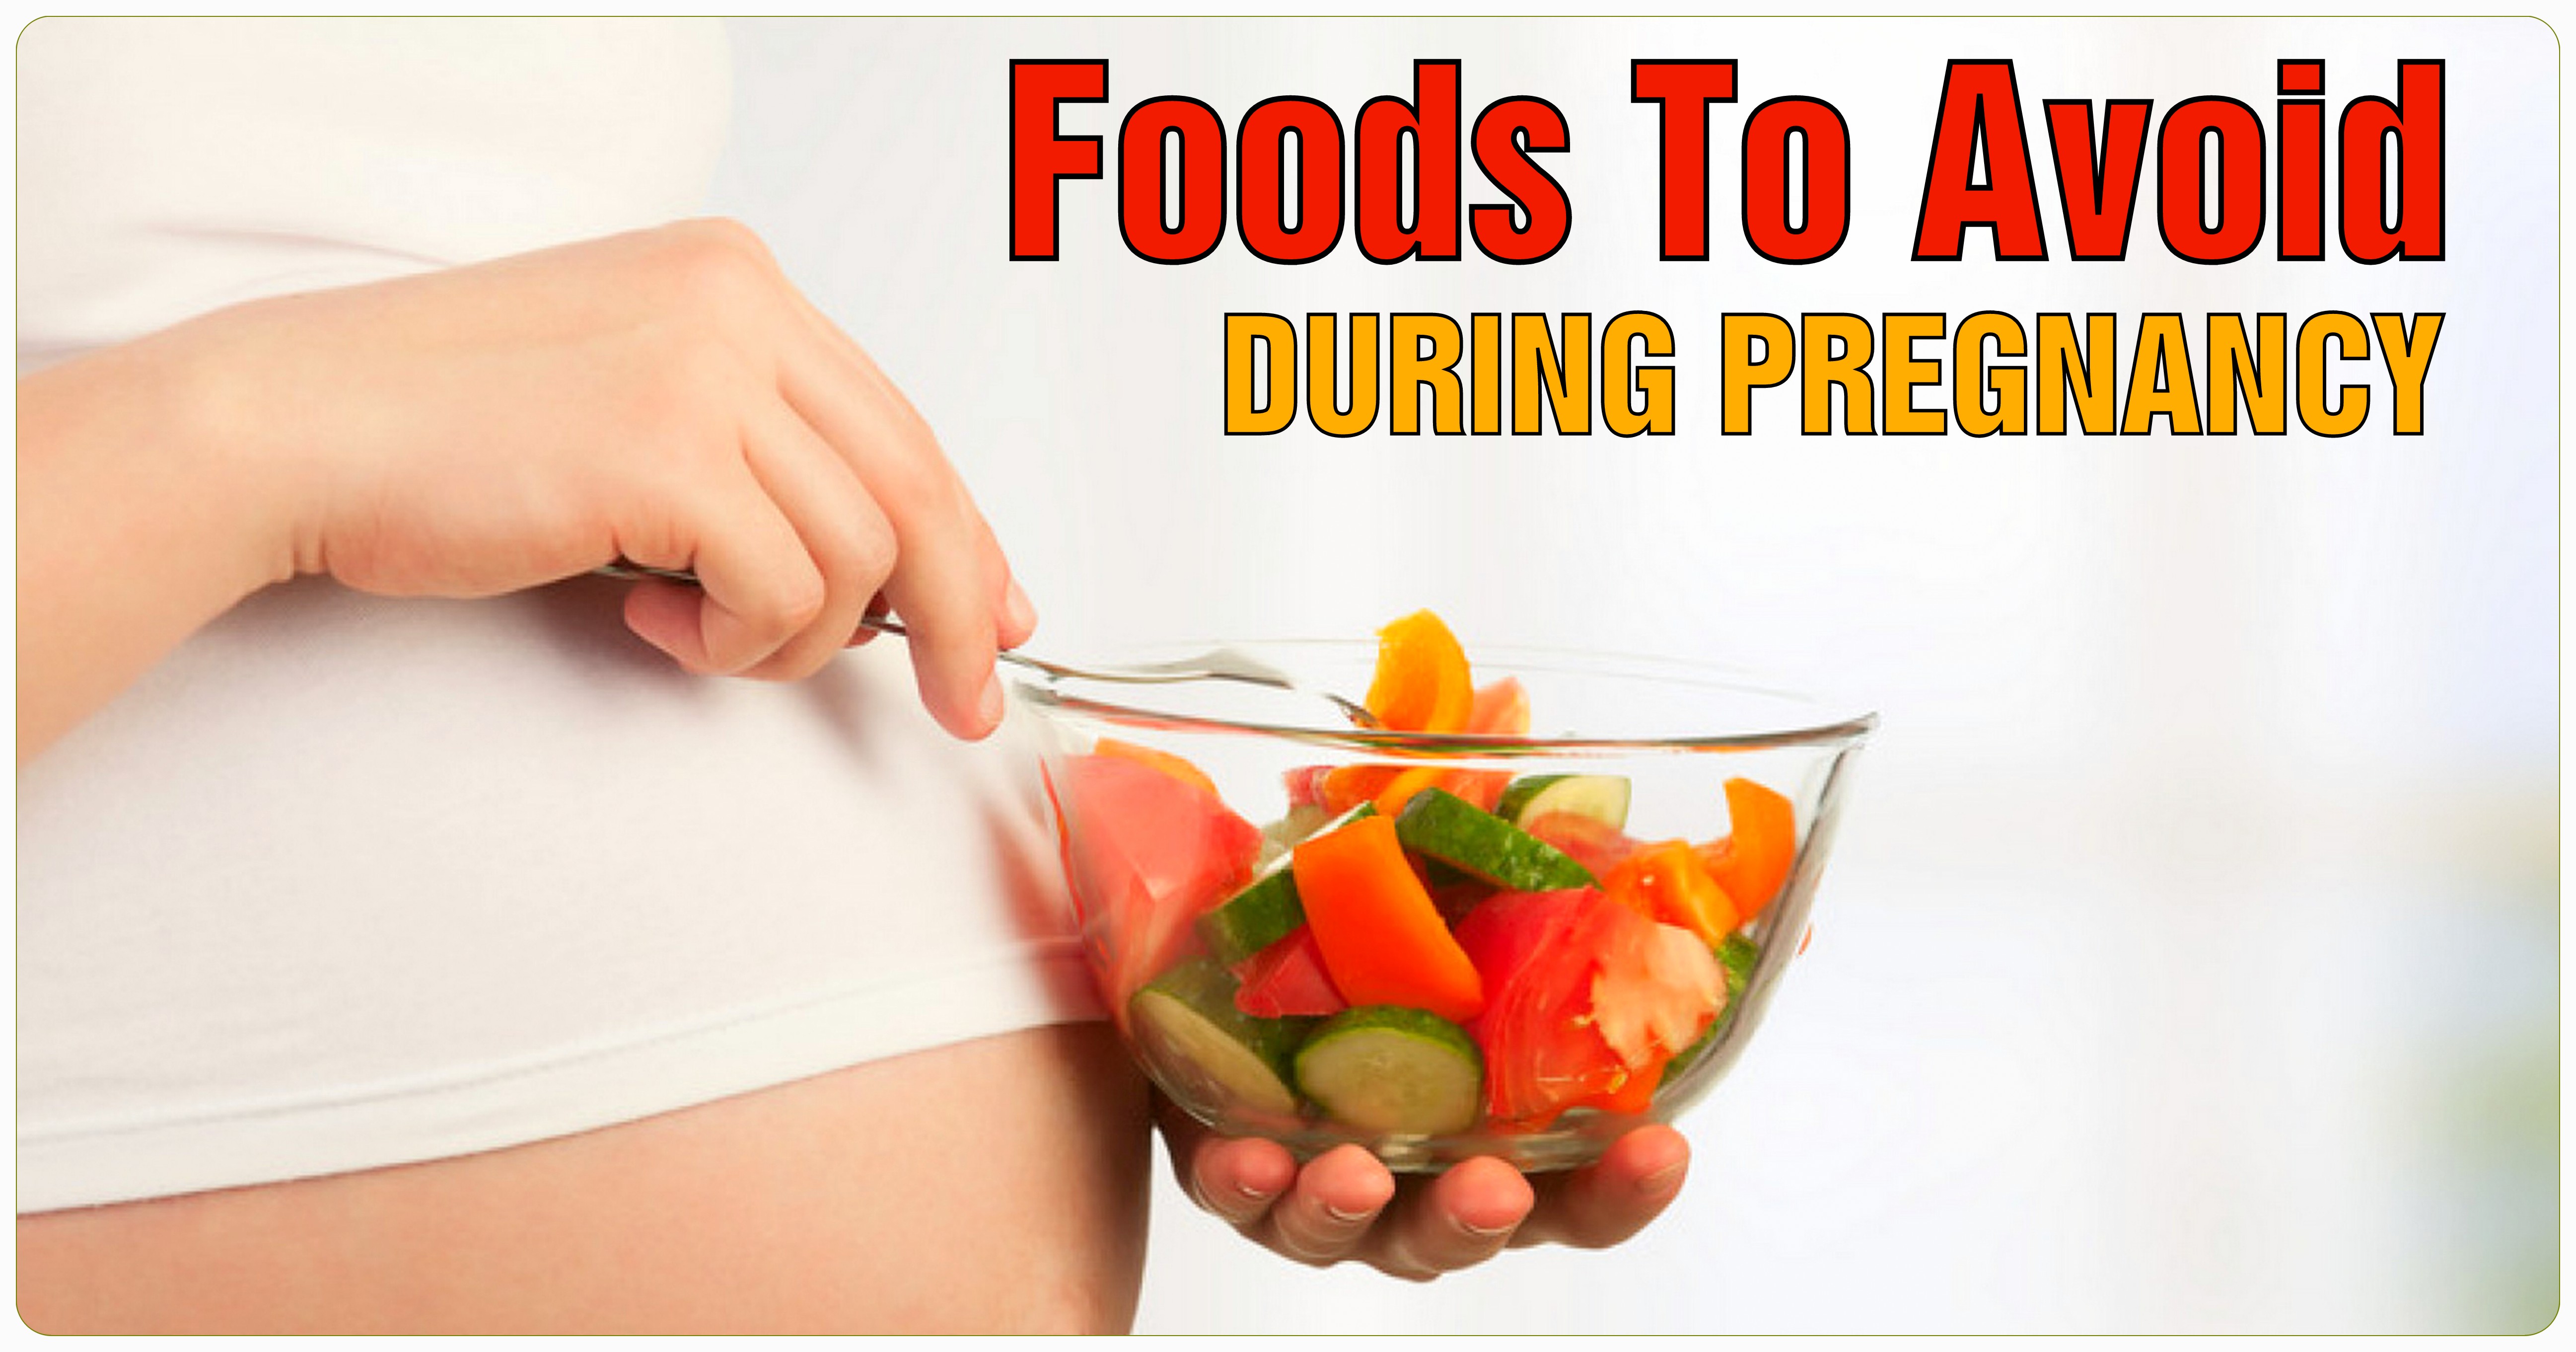 What Not To Eat During Pregnancy,fruits to avoid during pregnancy india